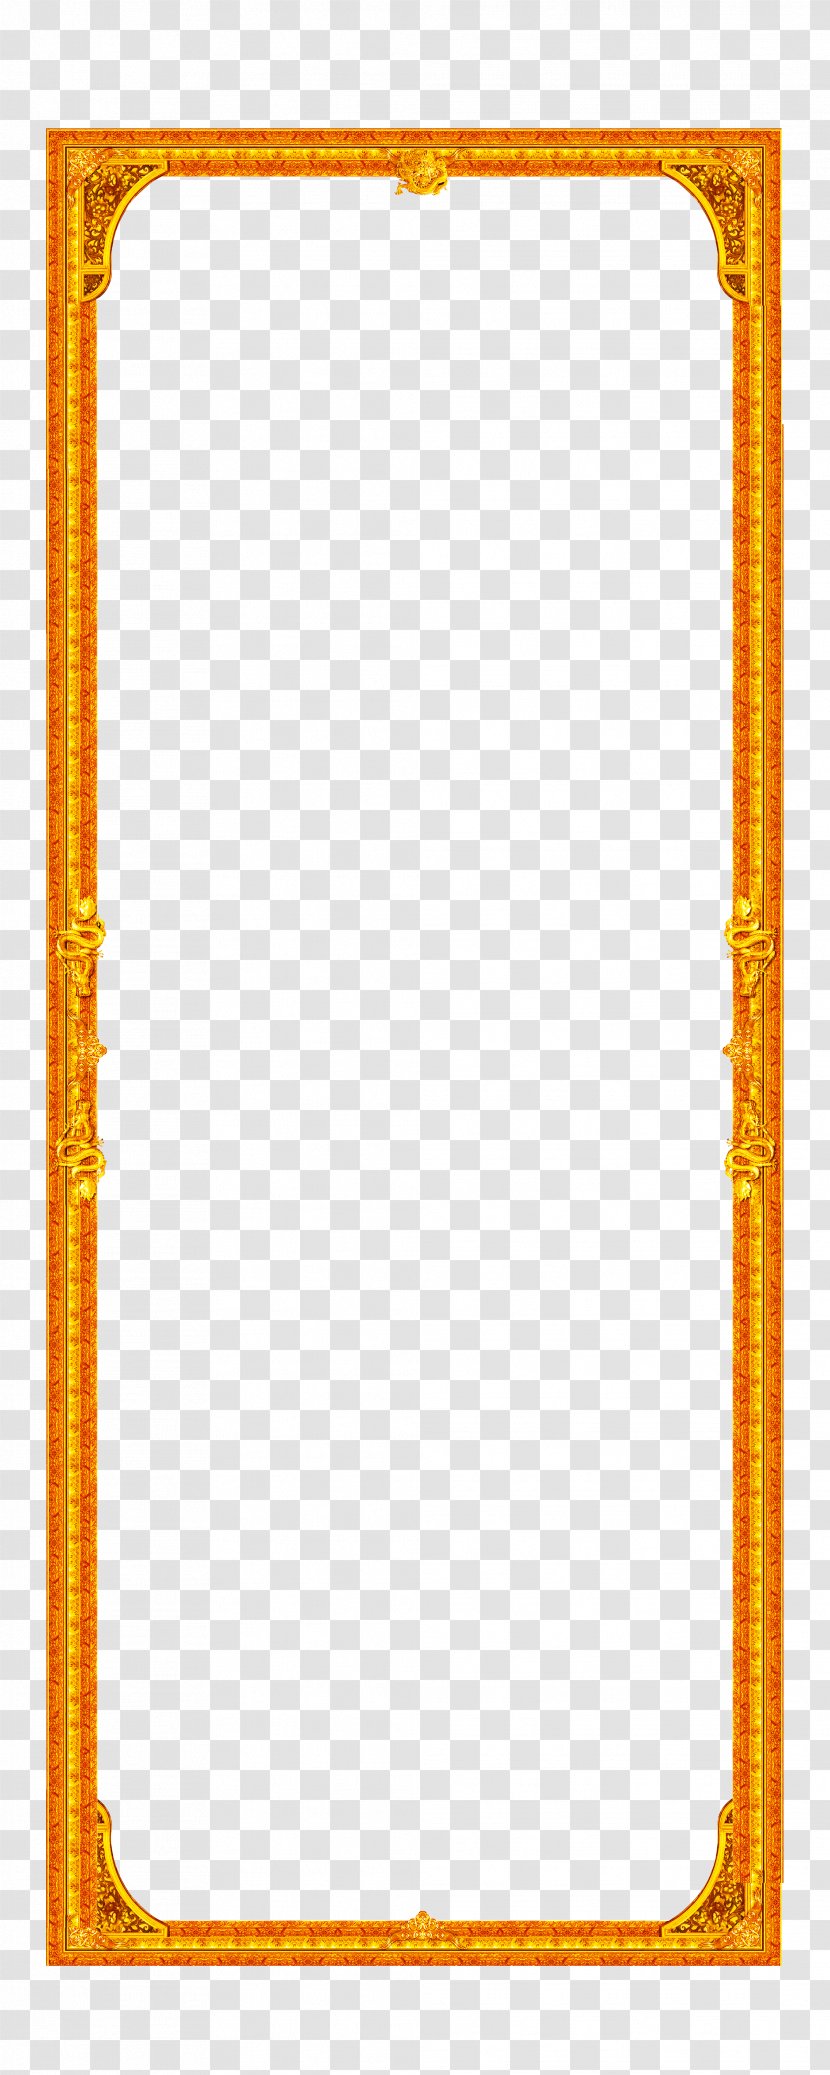 Icon - Chinese - Border Transparent PNG